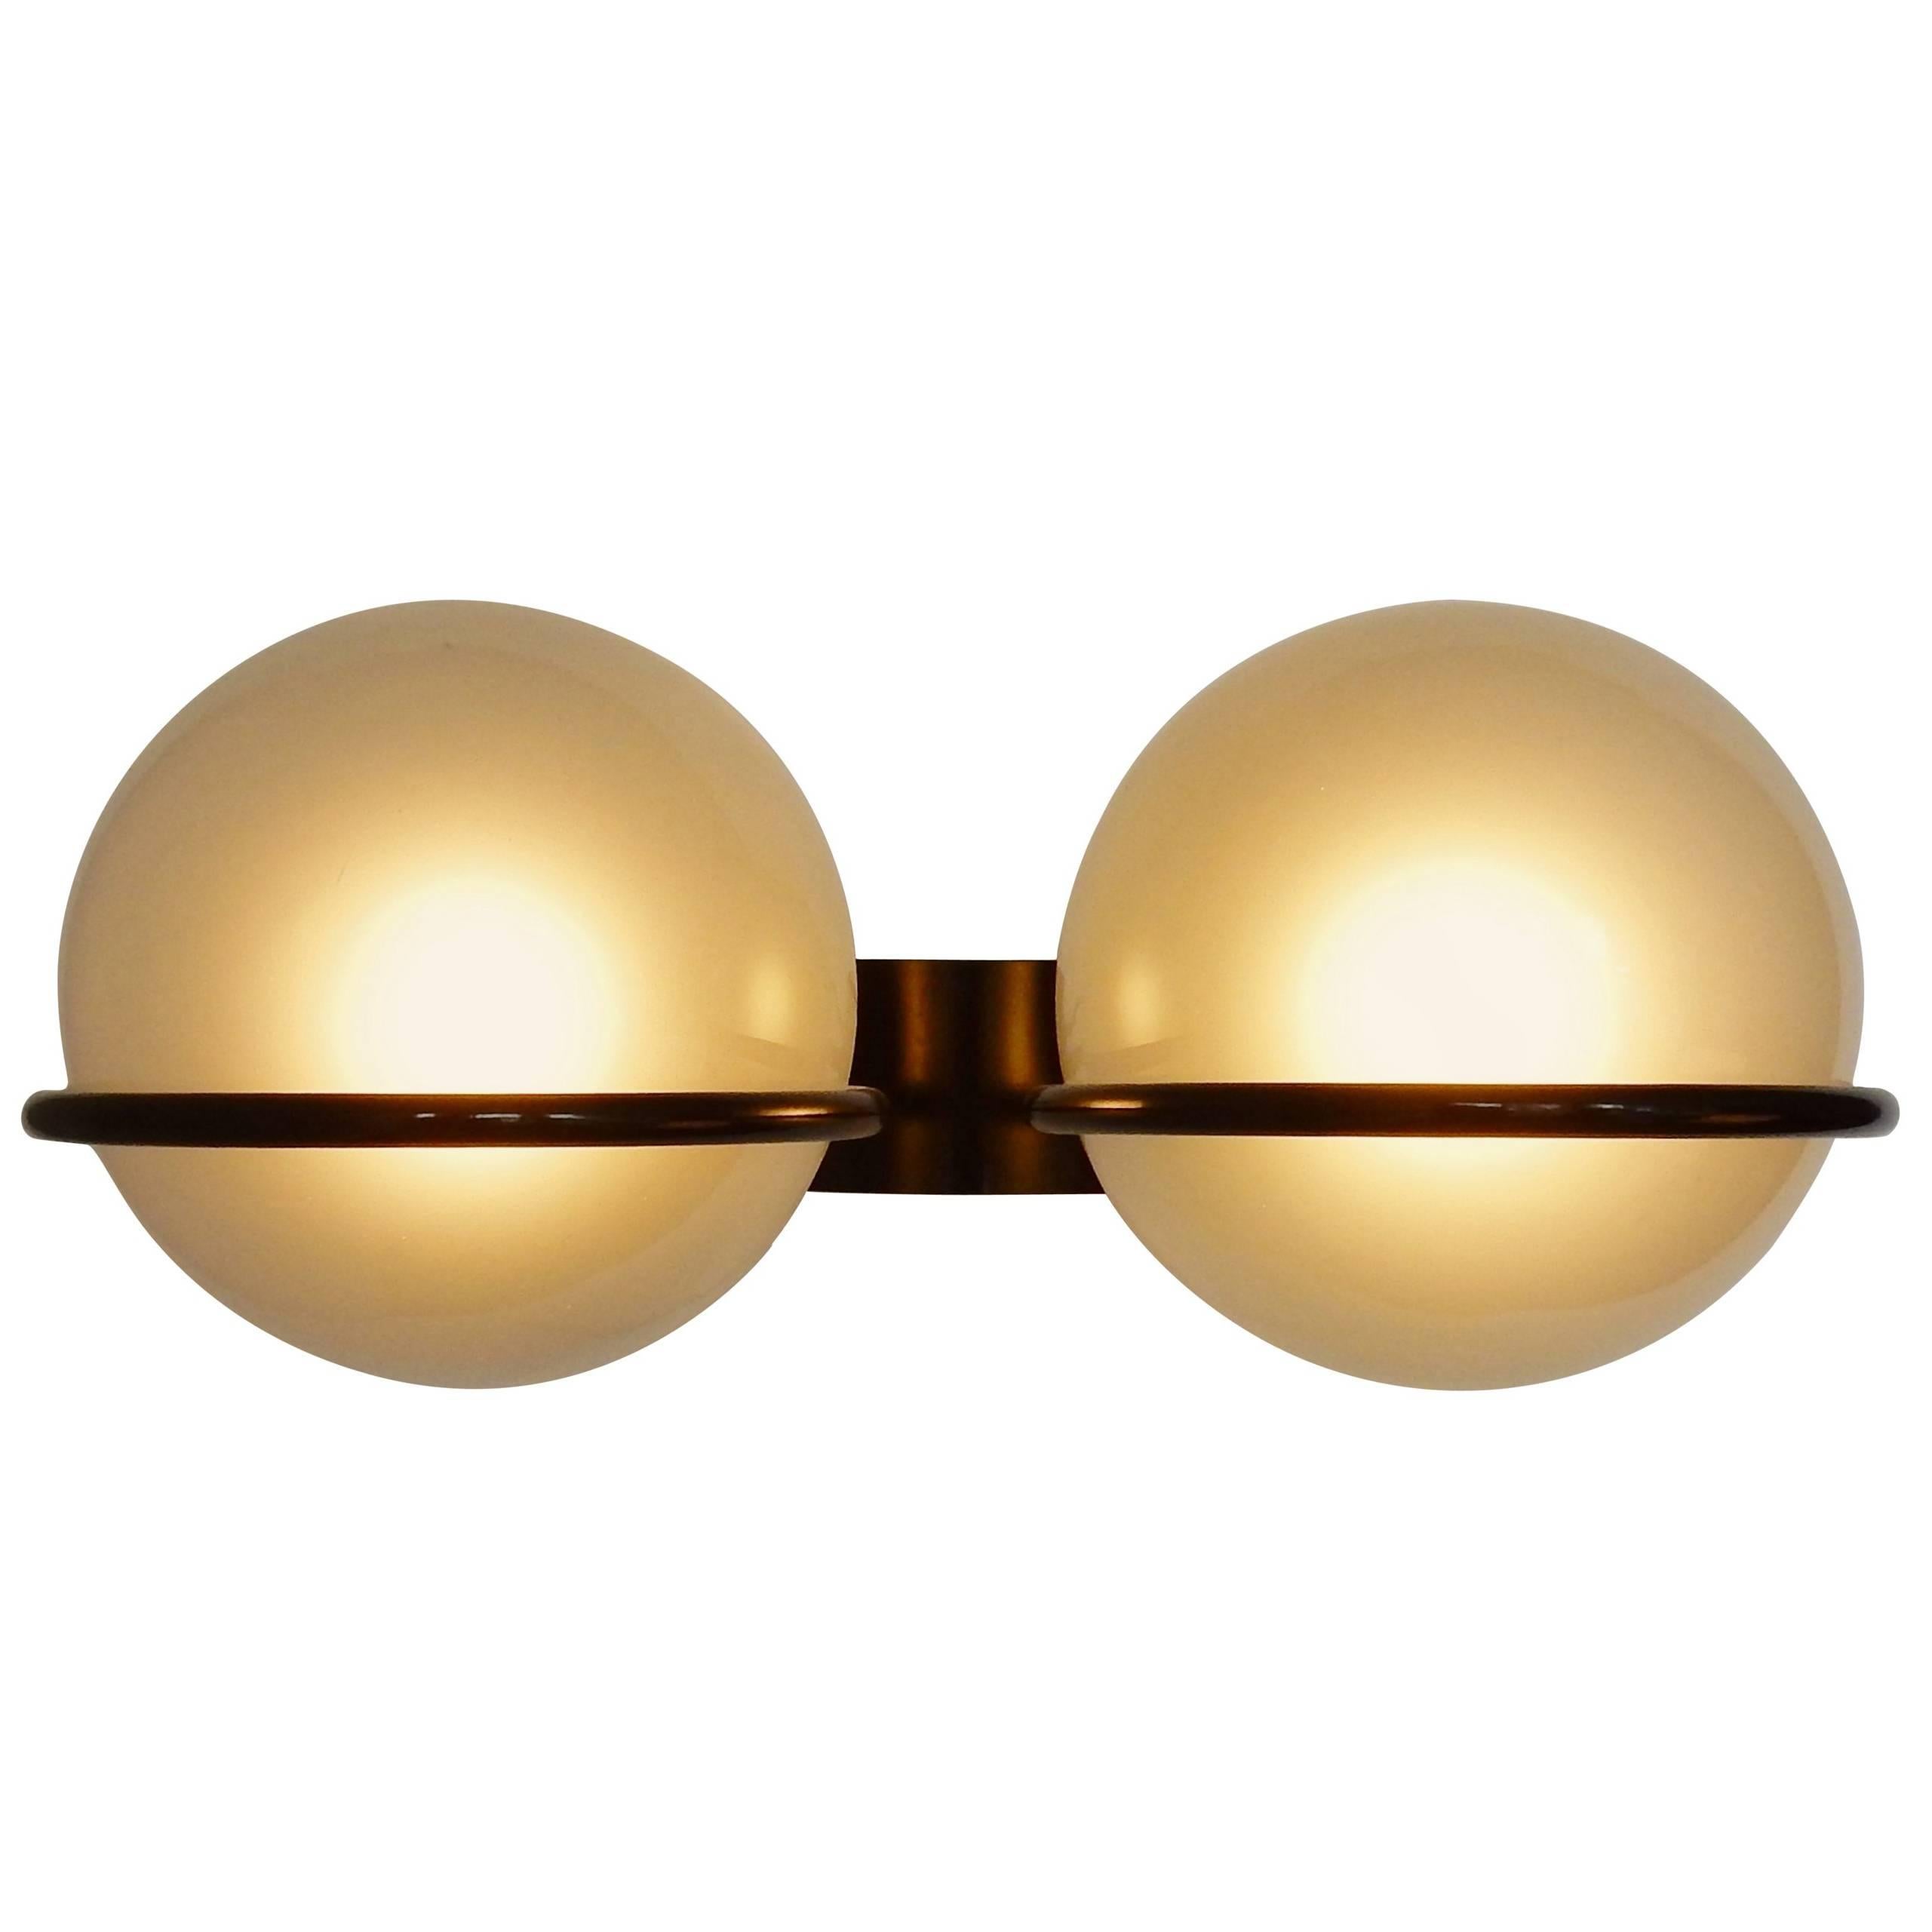 Model '328-2' Wall Sconce by Gino Sarfatti for Arteluce, Italy 1960s